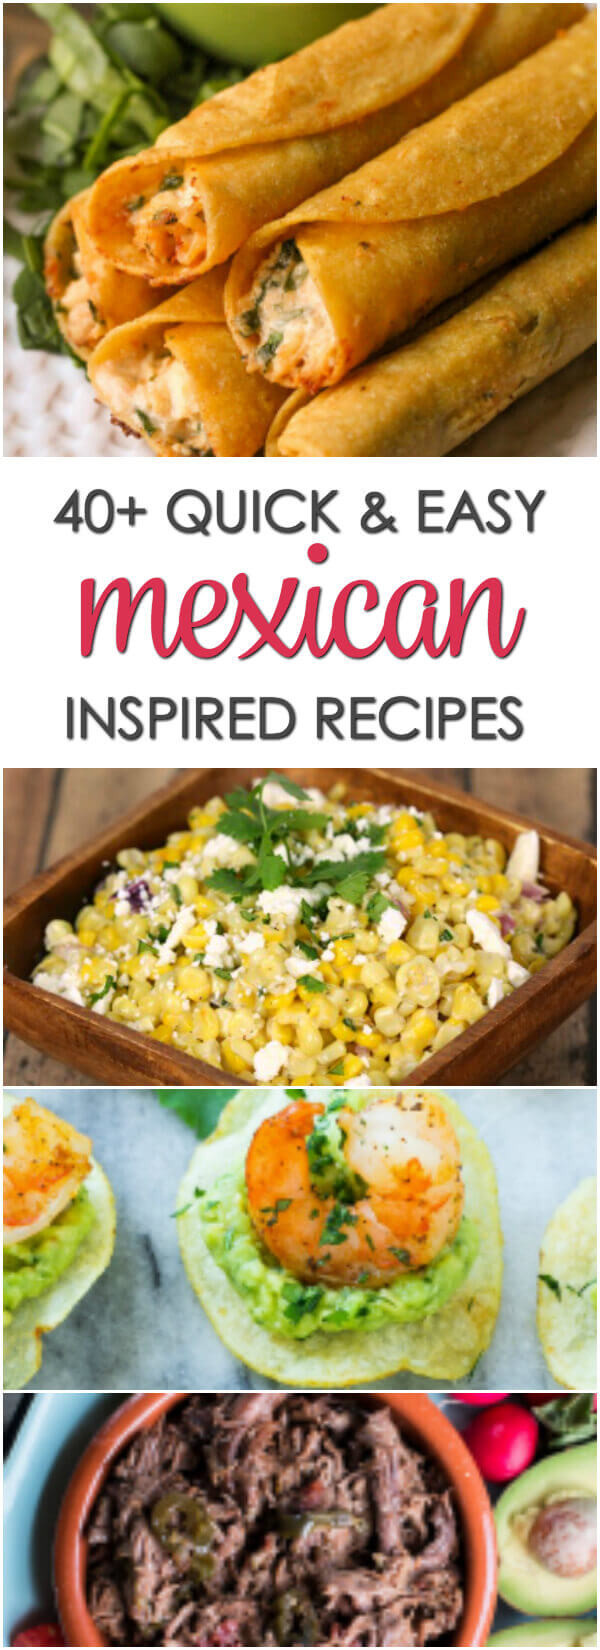 Quick And Easy Mexican Recipes
 40 Quick & Easy Mexican Recipes